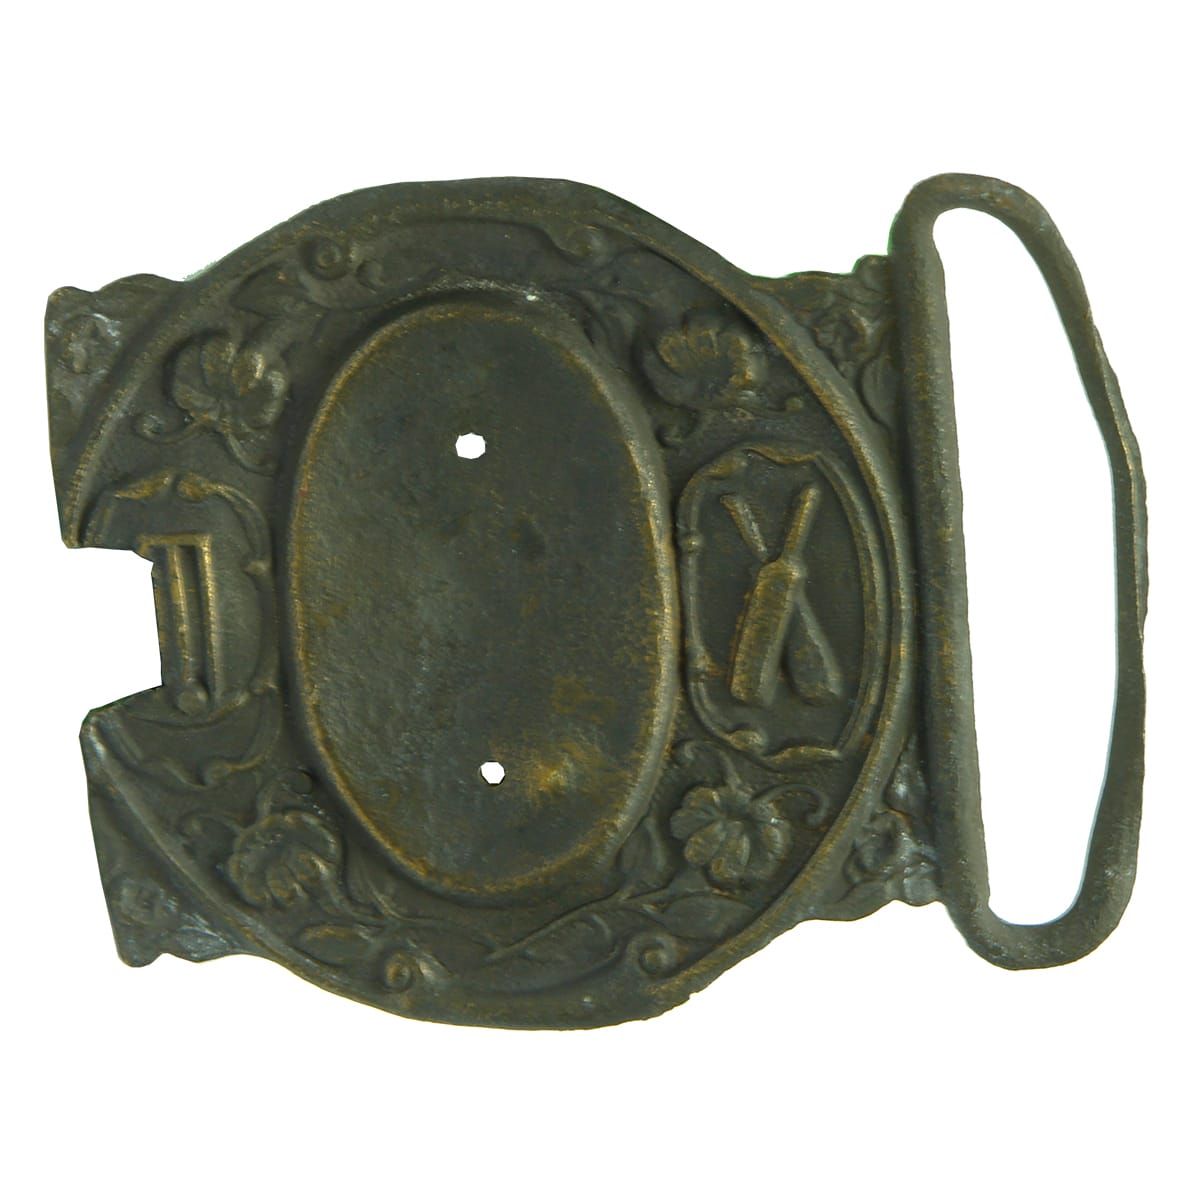 Cricket Belt Buckle. Equipment and flowers in surrounds.